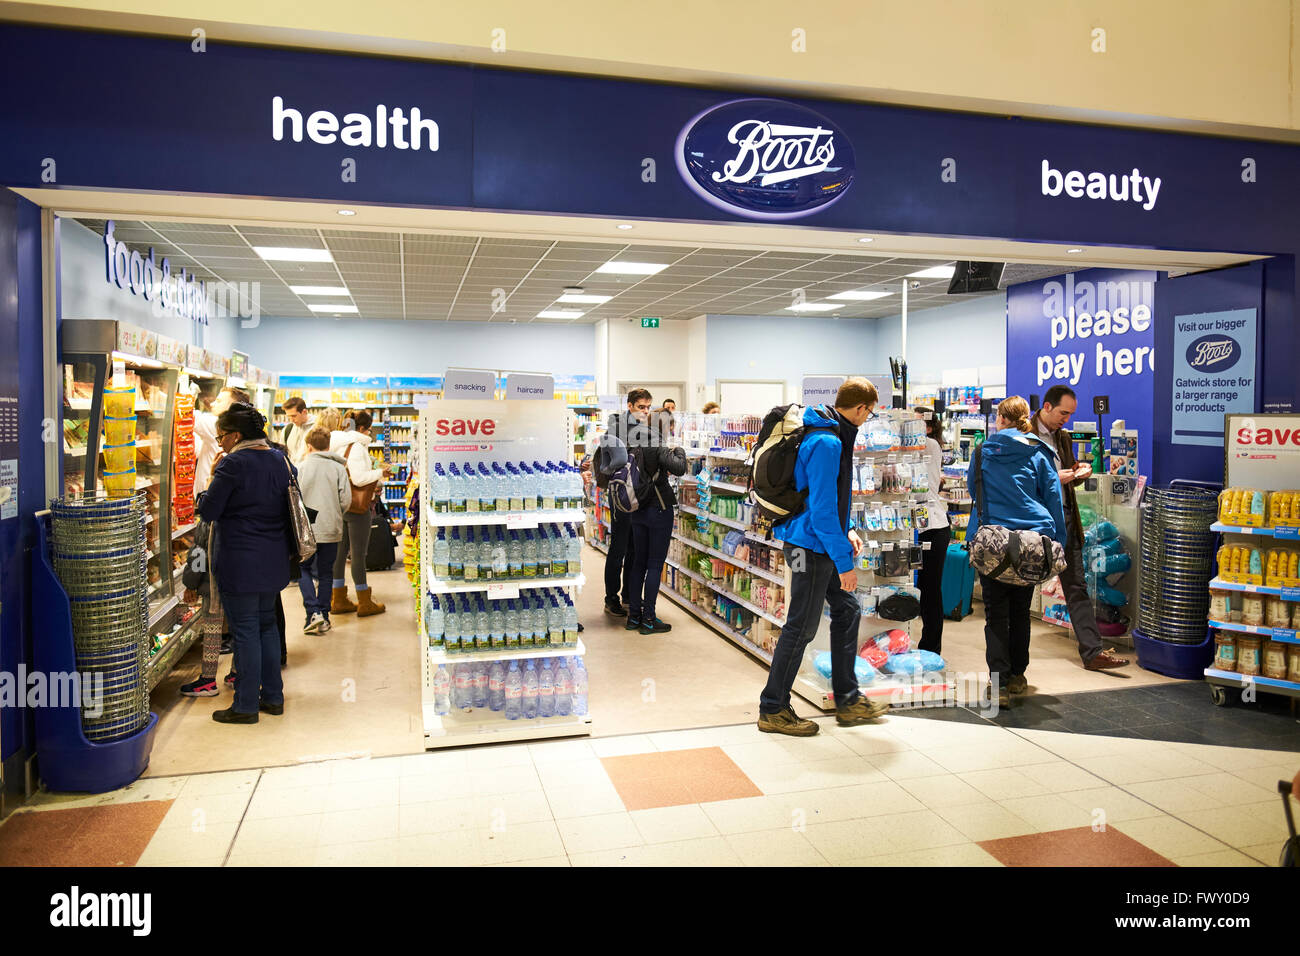 Boots Health And Beauty Duty Free Shop North Terminal Gatwick Airport West  Sussex London UK Stock Photo - Alamy